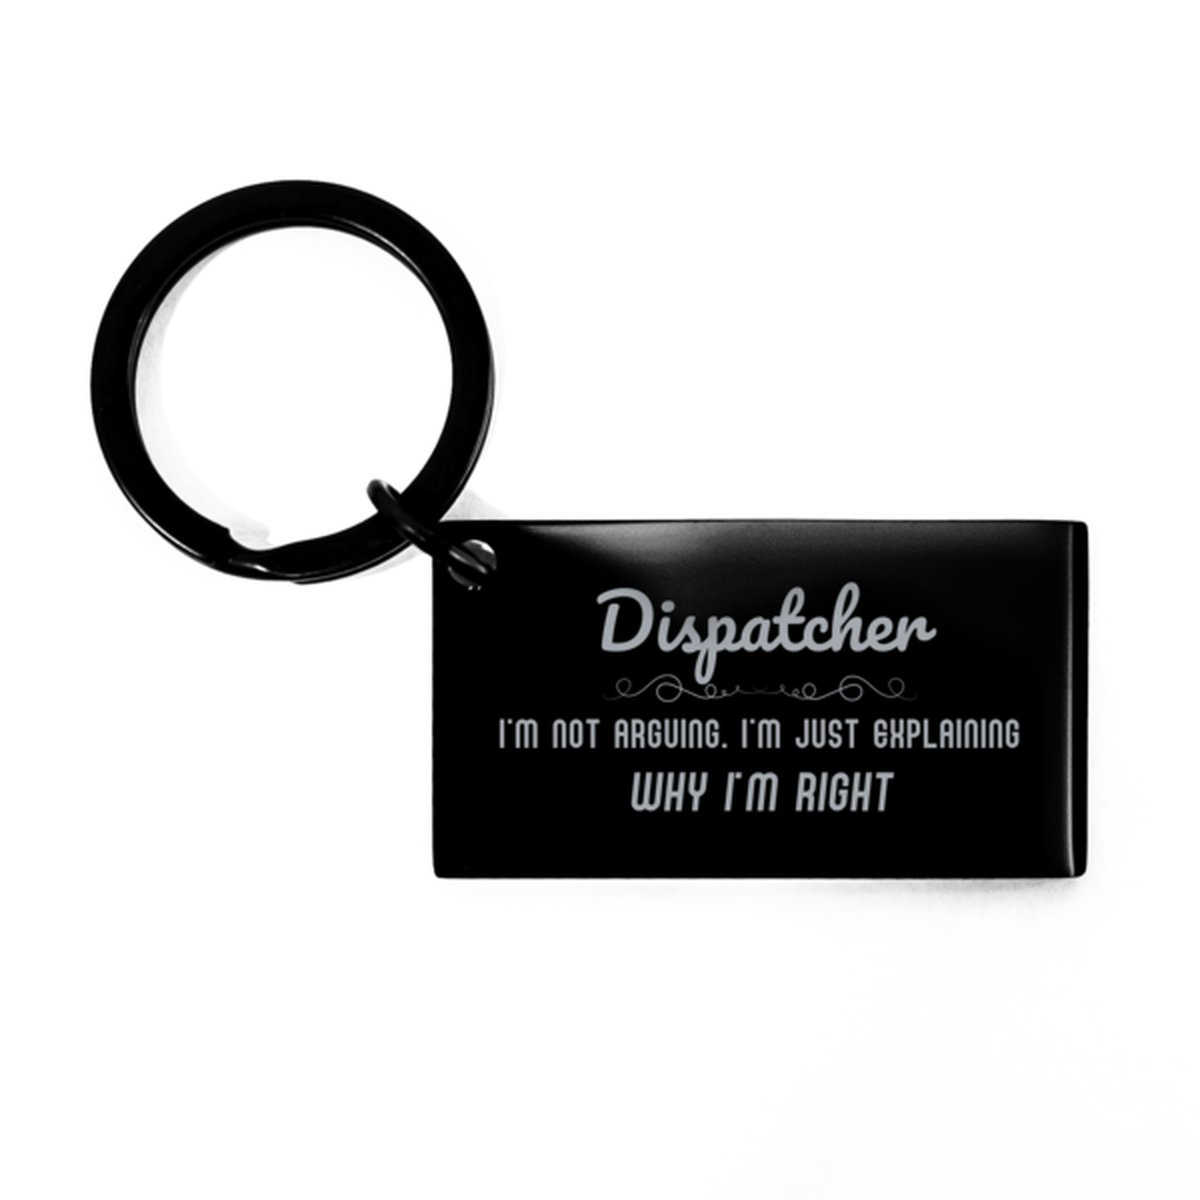 Dispatcher I'm not Arguing. I'm Just Explaining Why I'm RIGHT Keychain, Funny Saying Quote Dispatcher Gifts For Dispatcher Graduation Birthday Christmas Gifts for Men Women Coworker